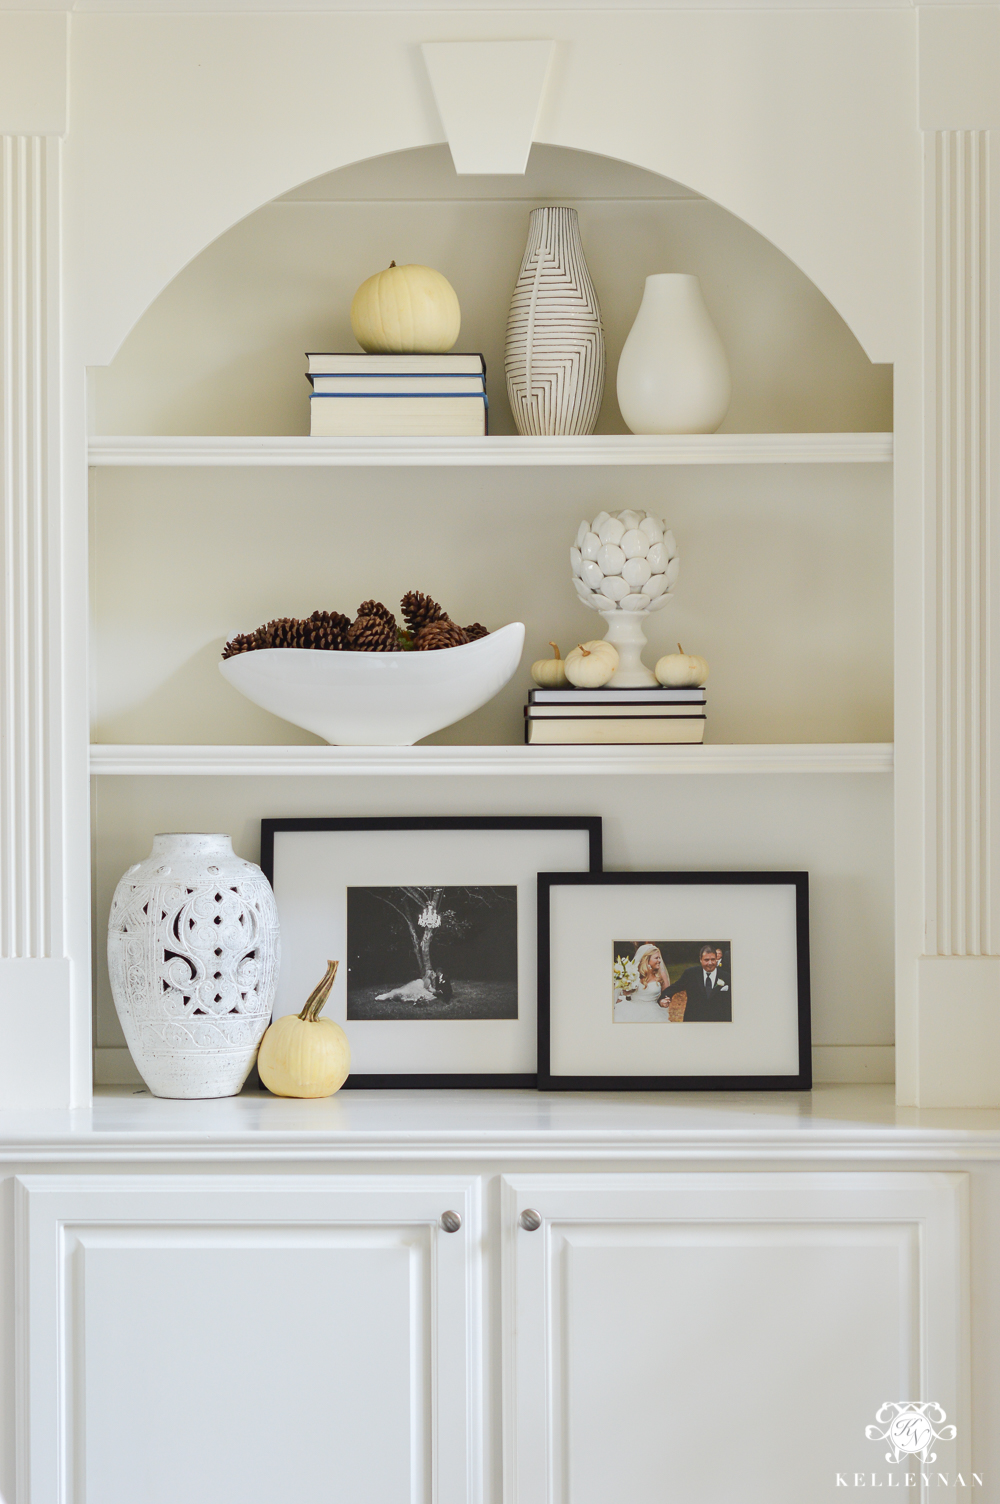 Tips And Ideas For Styling Bookshelves, Built In Shelves Decorating Ideas